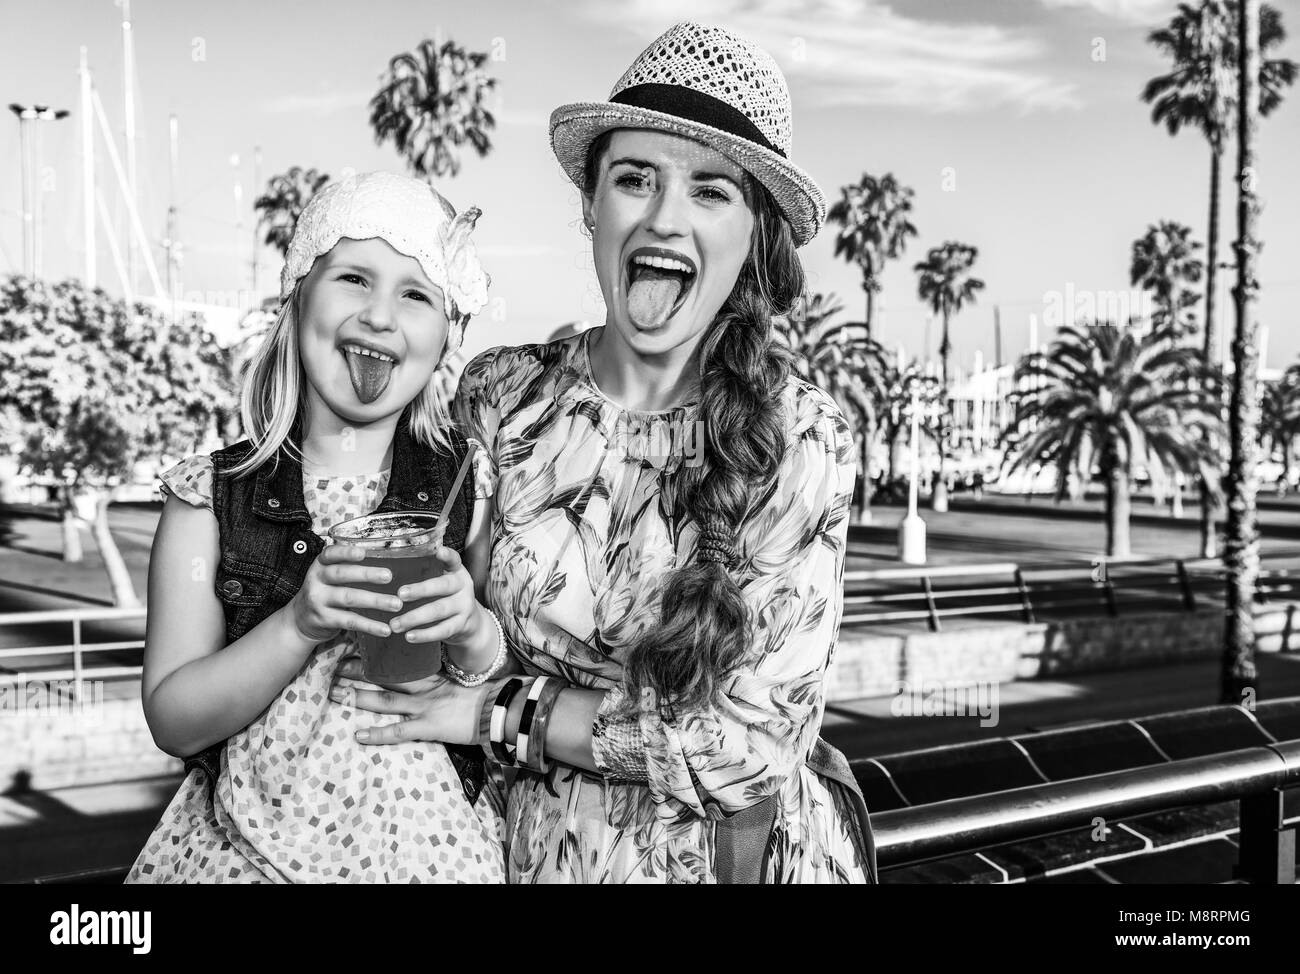 Summertime at colorful Barcelona. happy modern mother and child tourists on embankment in Barcelona, Spain showing tongues after drinking bright red b Stock Photo